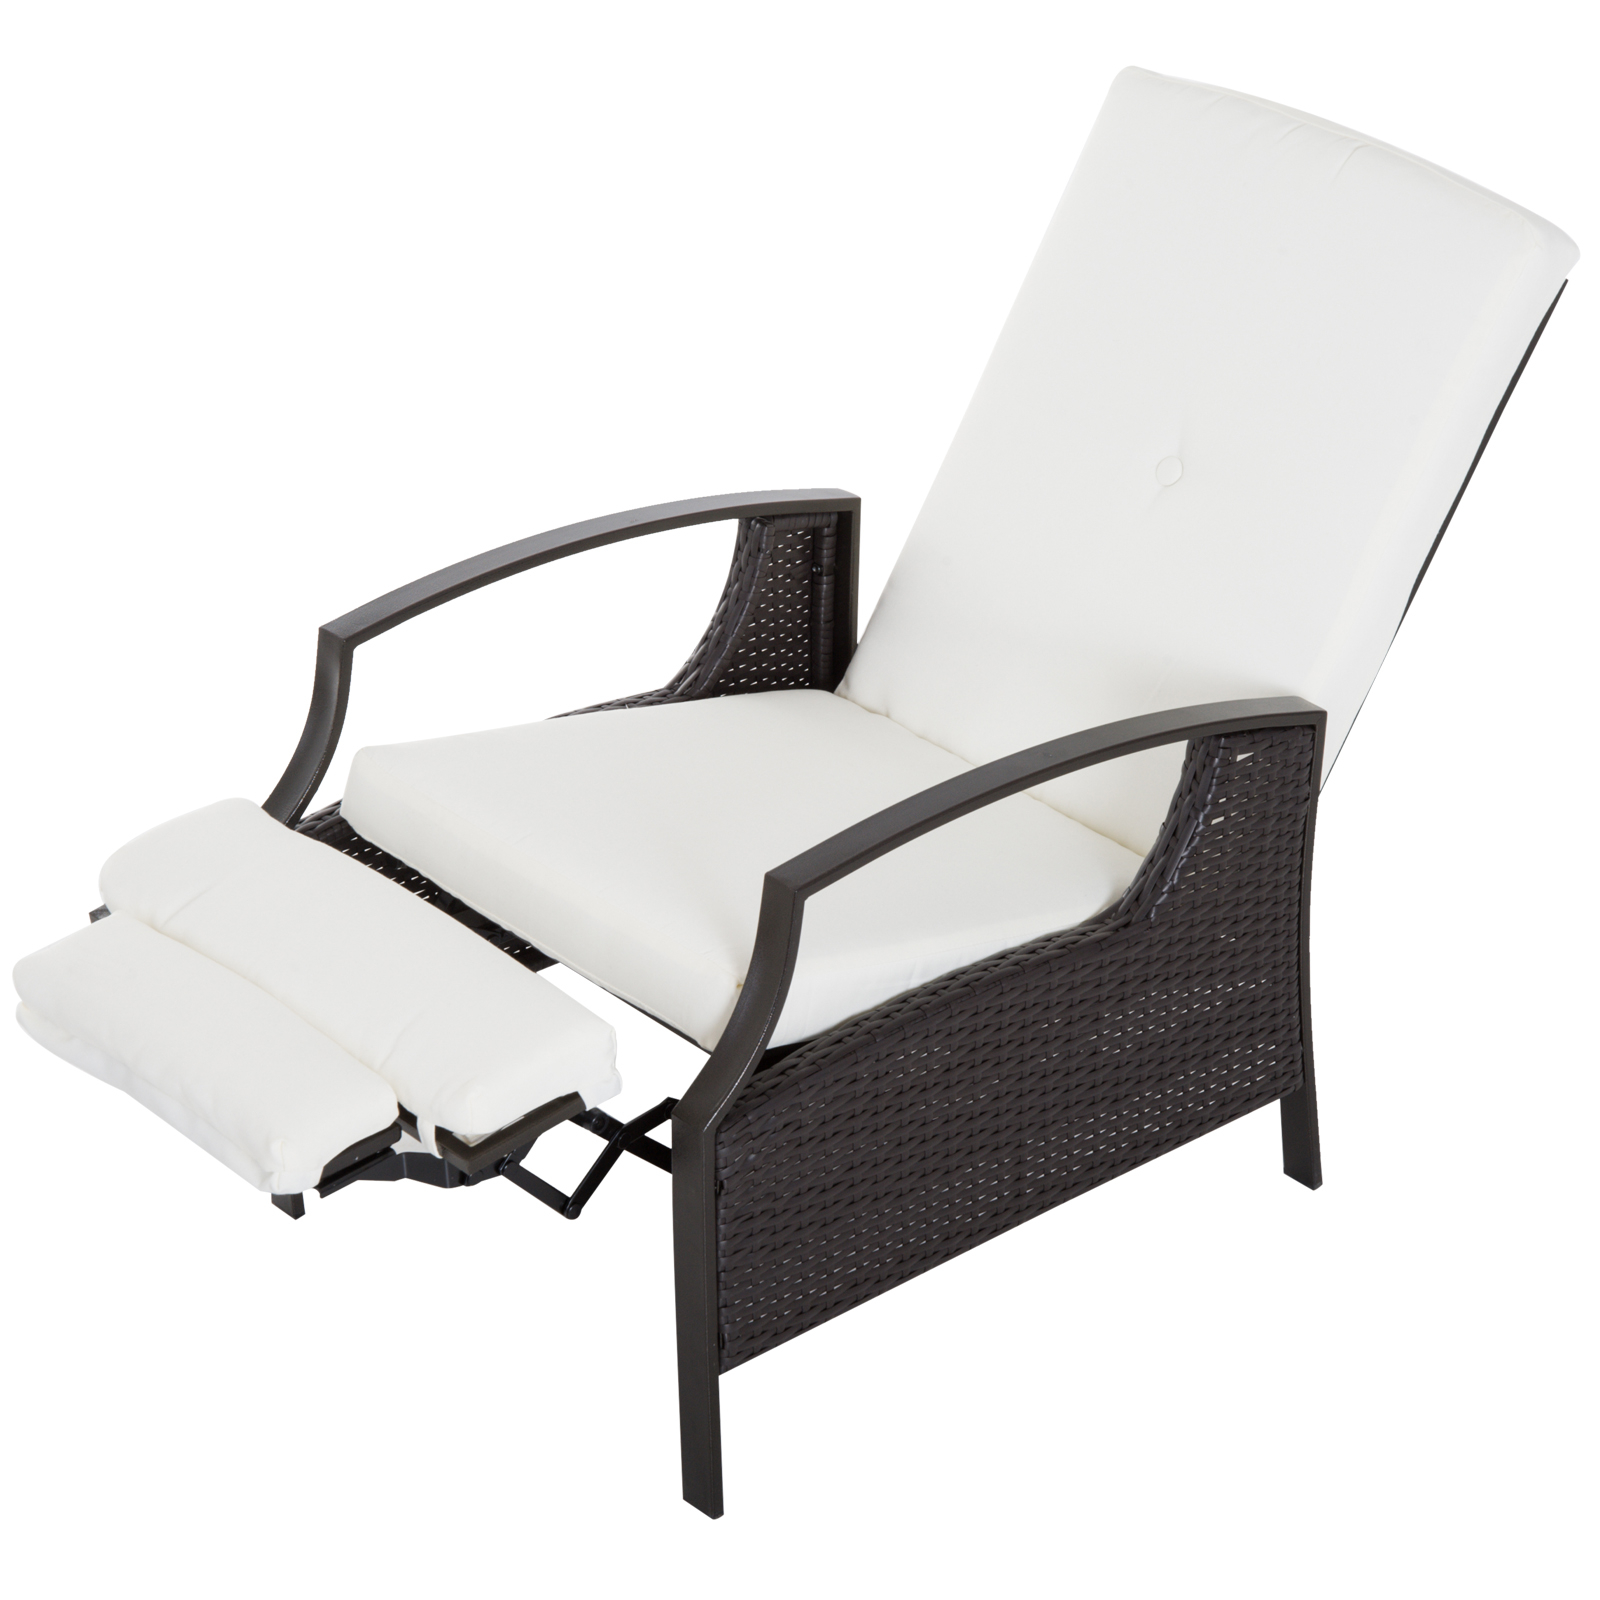 Outdoor Recliners Visualhunt, Outdoor Recliner Chair Covers